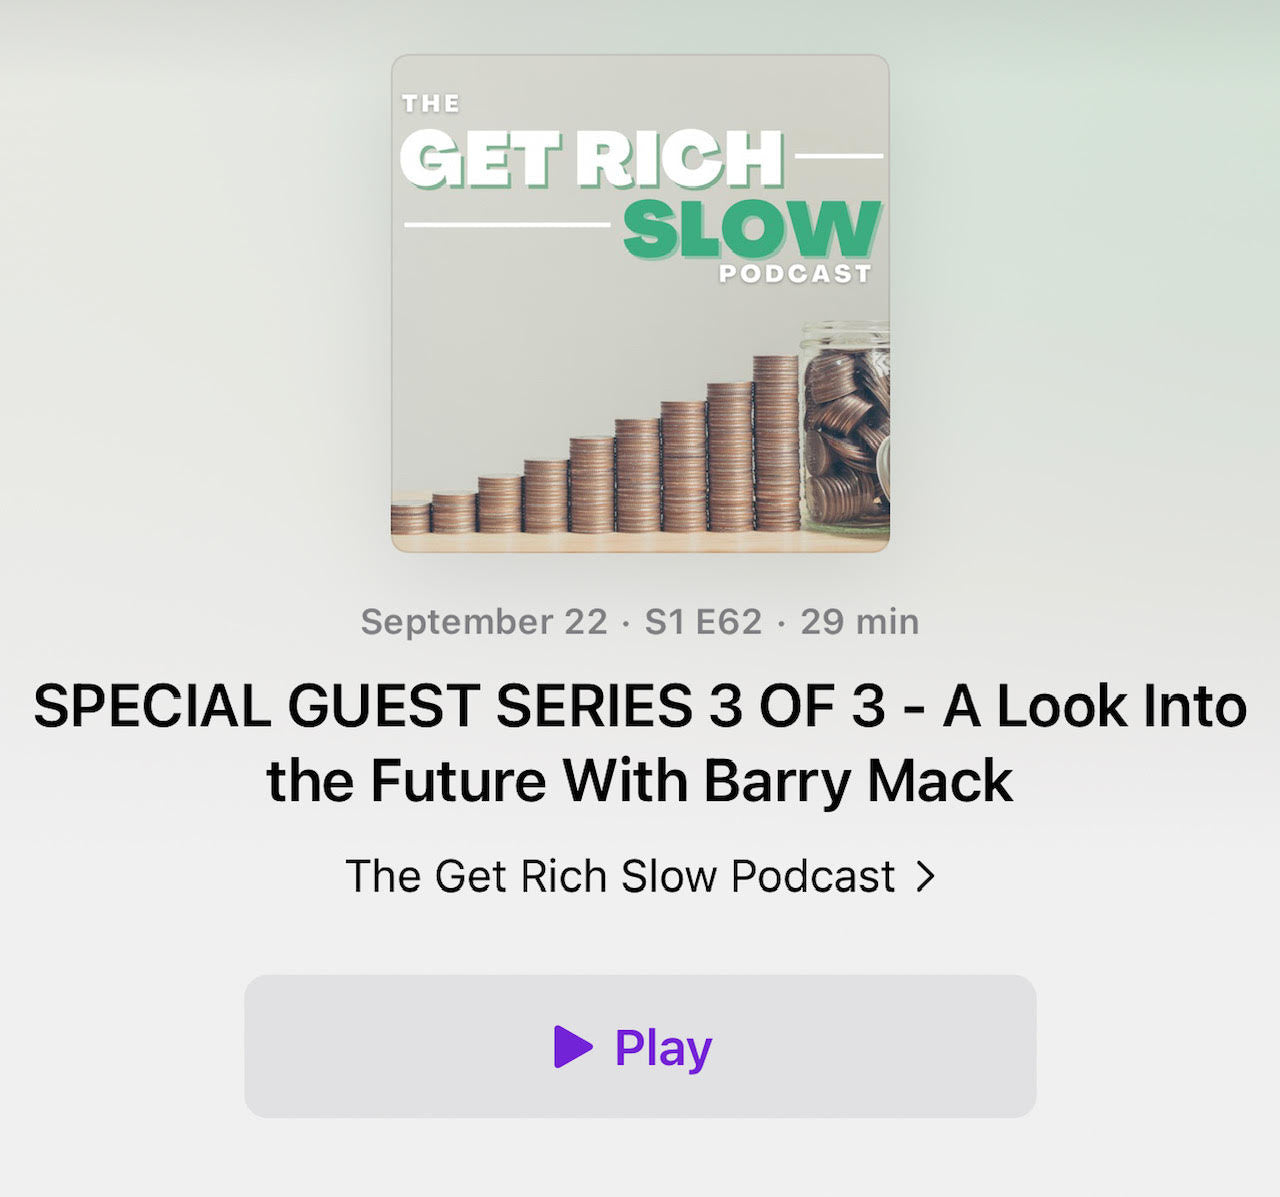 The Get Rich Slow Podcast 3 of 3